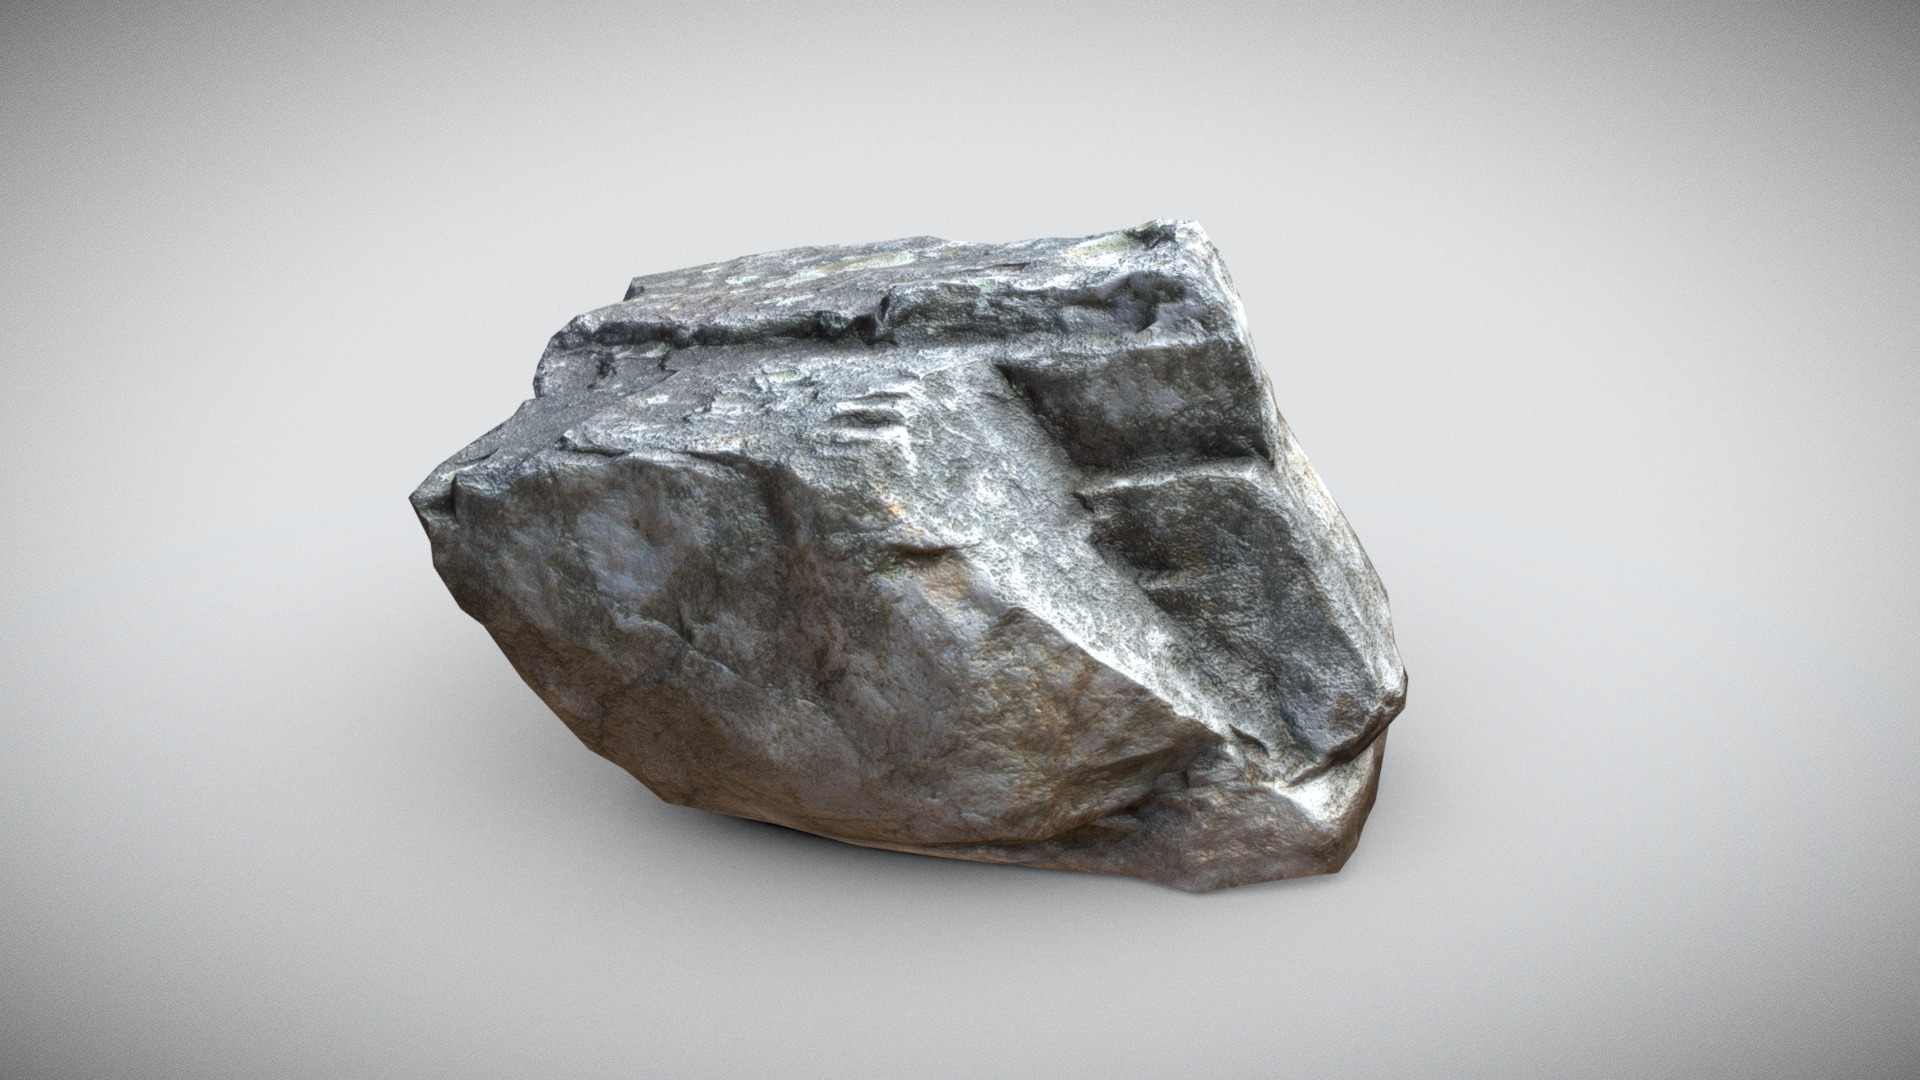 3D model ROCK 001 - This is a 3D model of the ROCK 001. The 3D model is about a rock with a dark gray and white speckled surface.